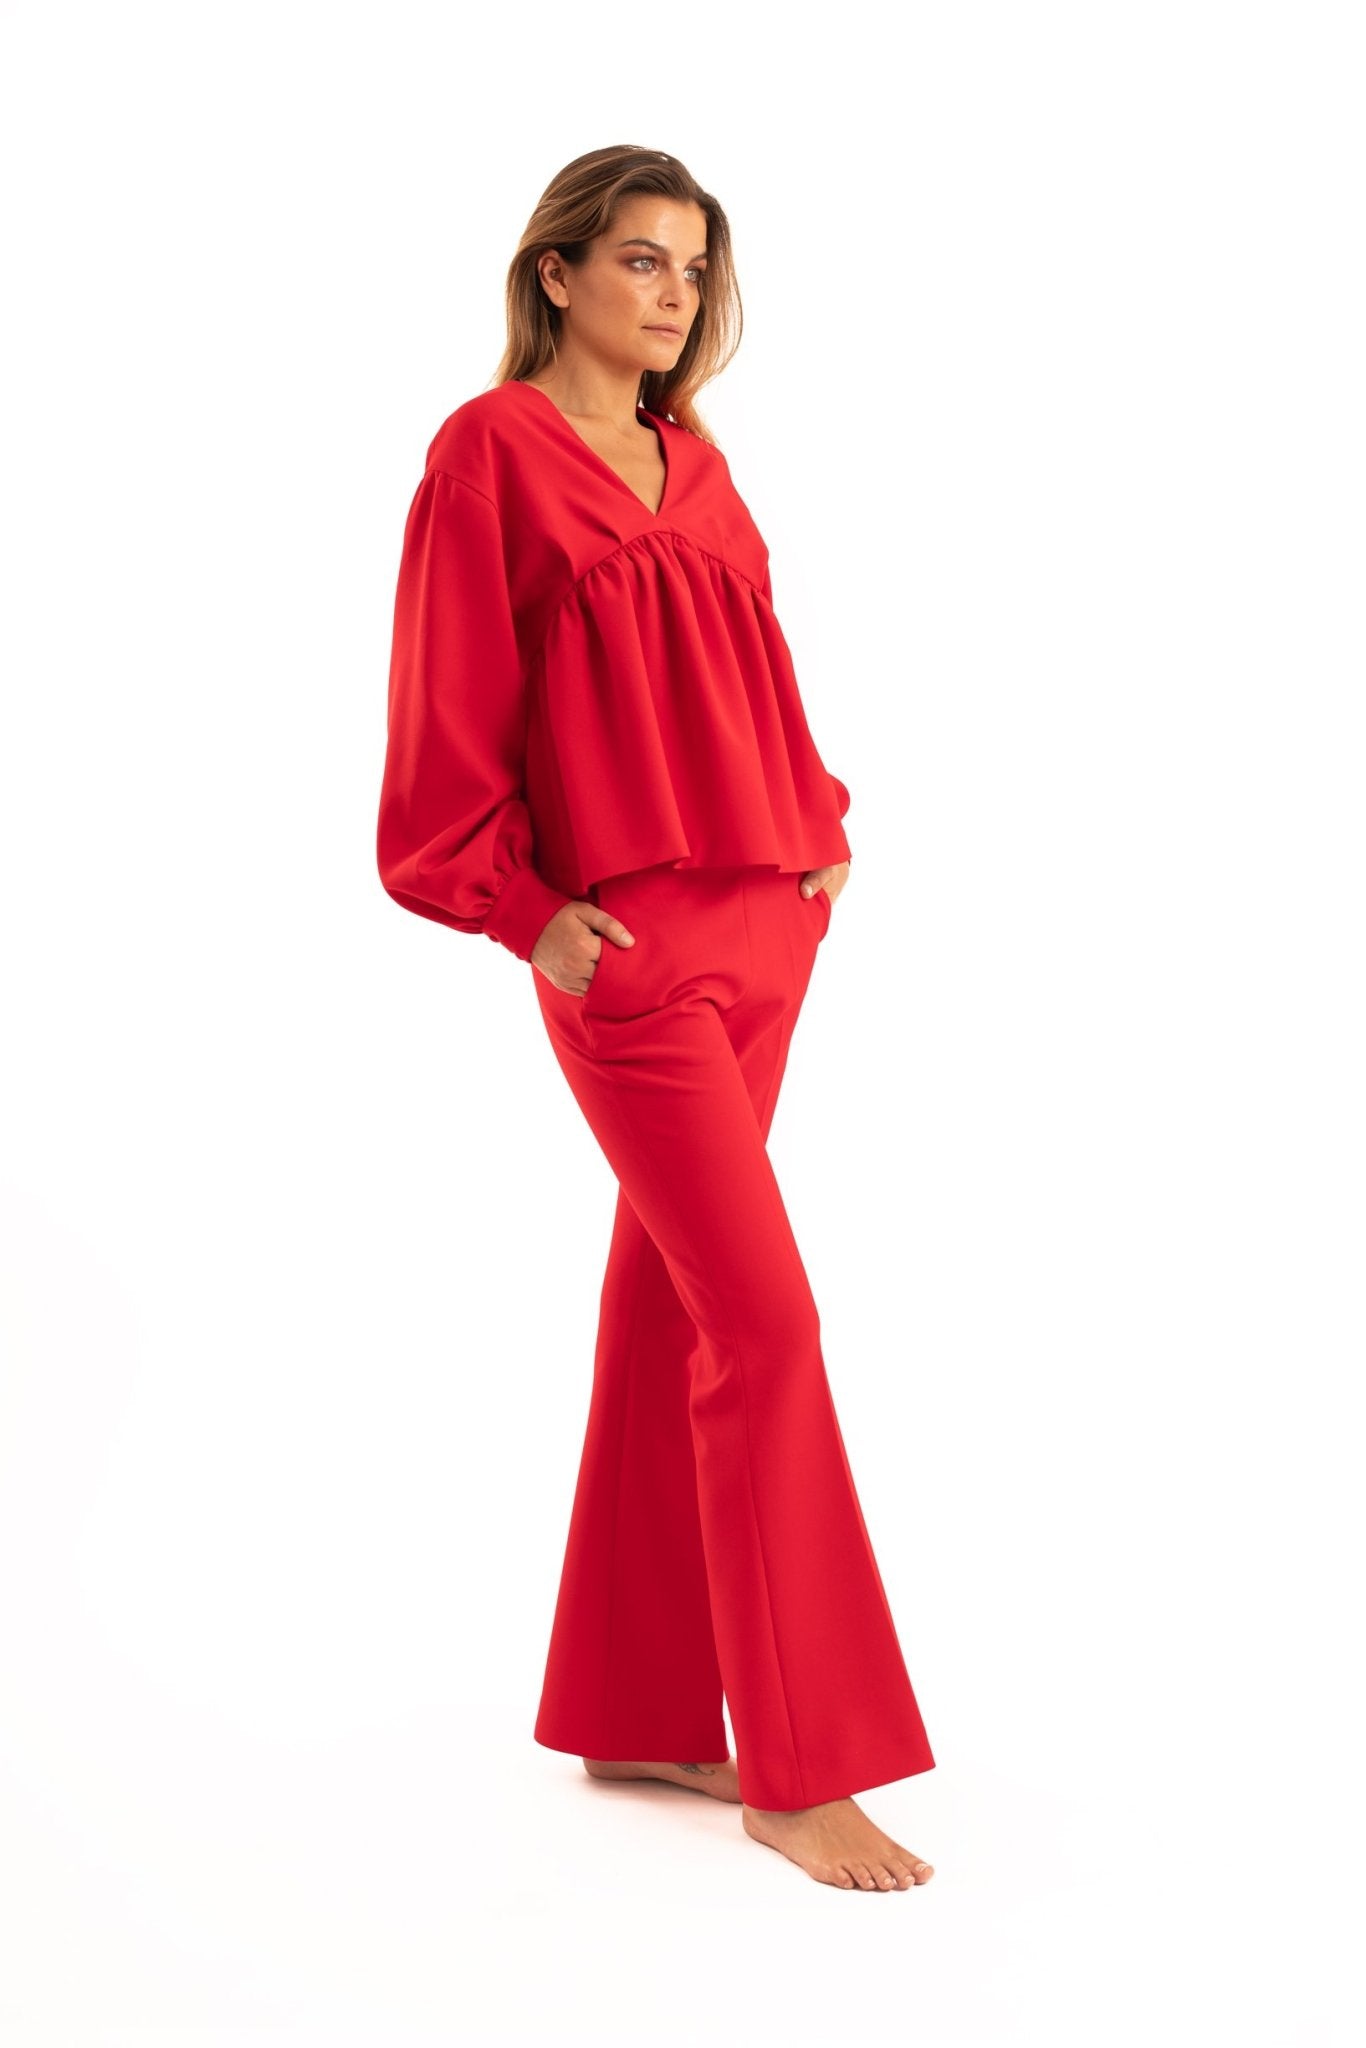 Red Balone Blouse - NOPIN - The Clothing LoungeNOPIN